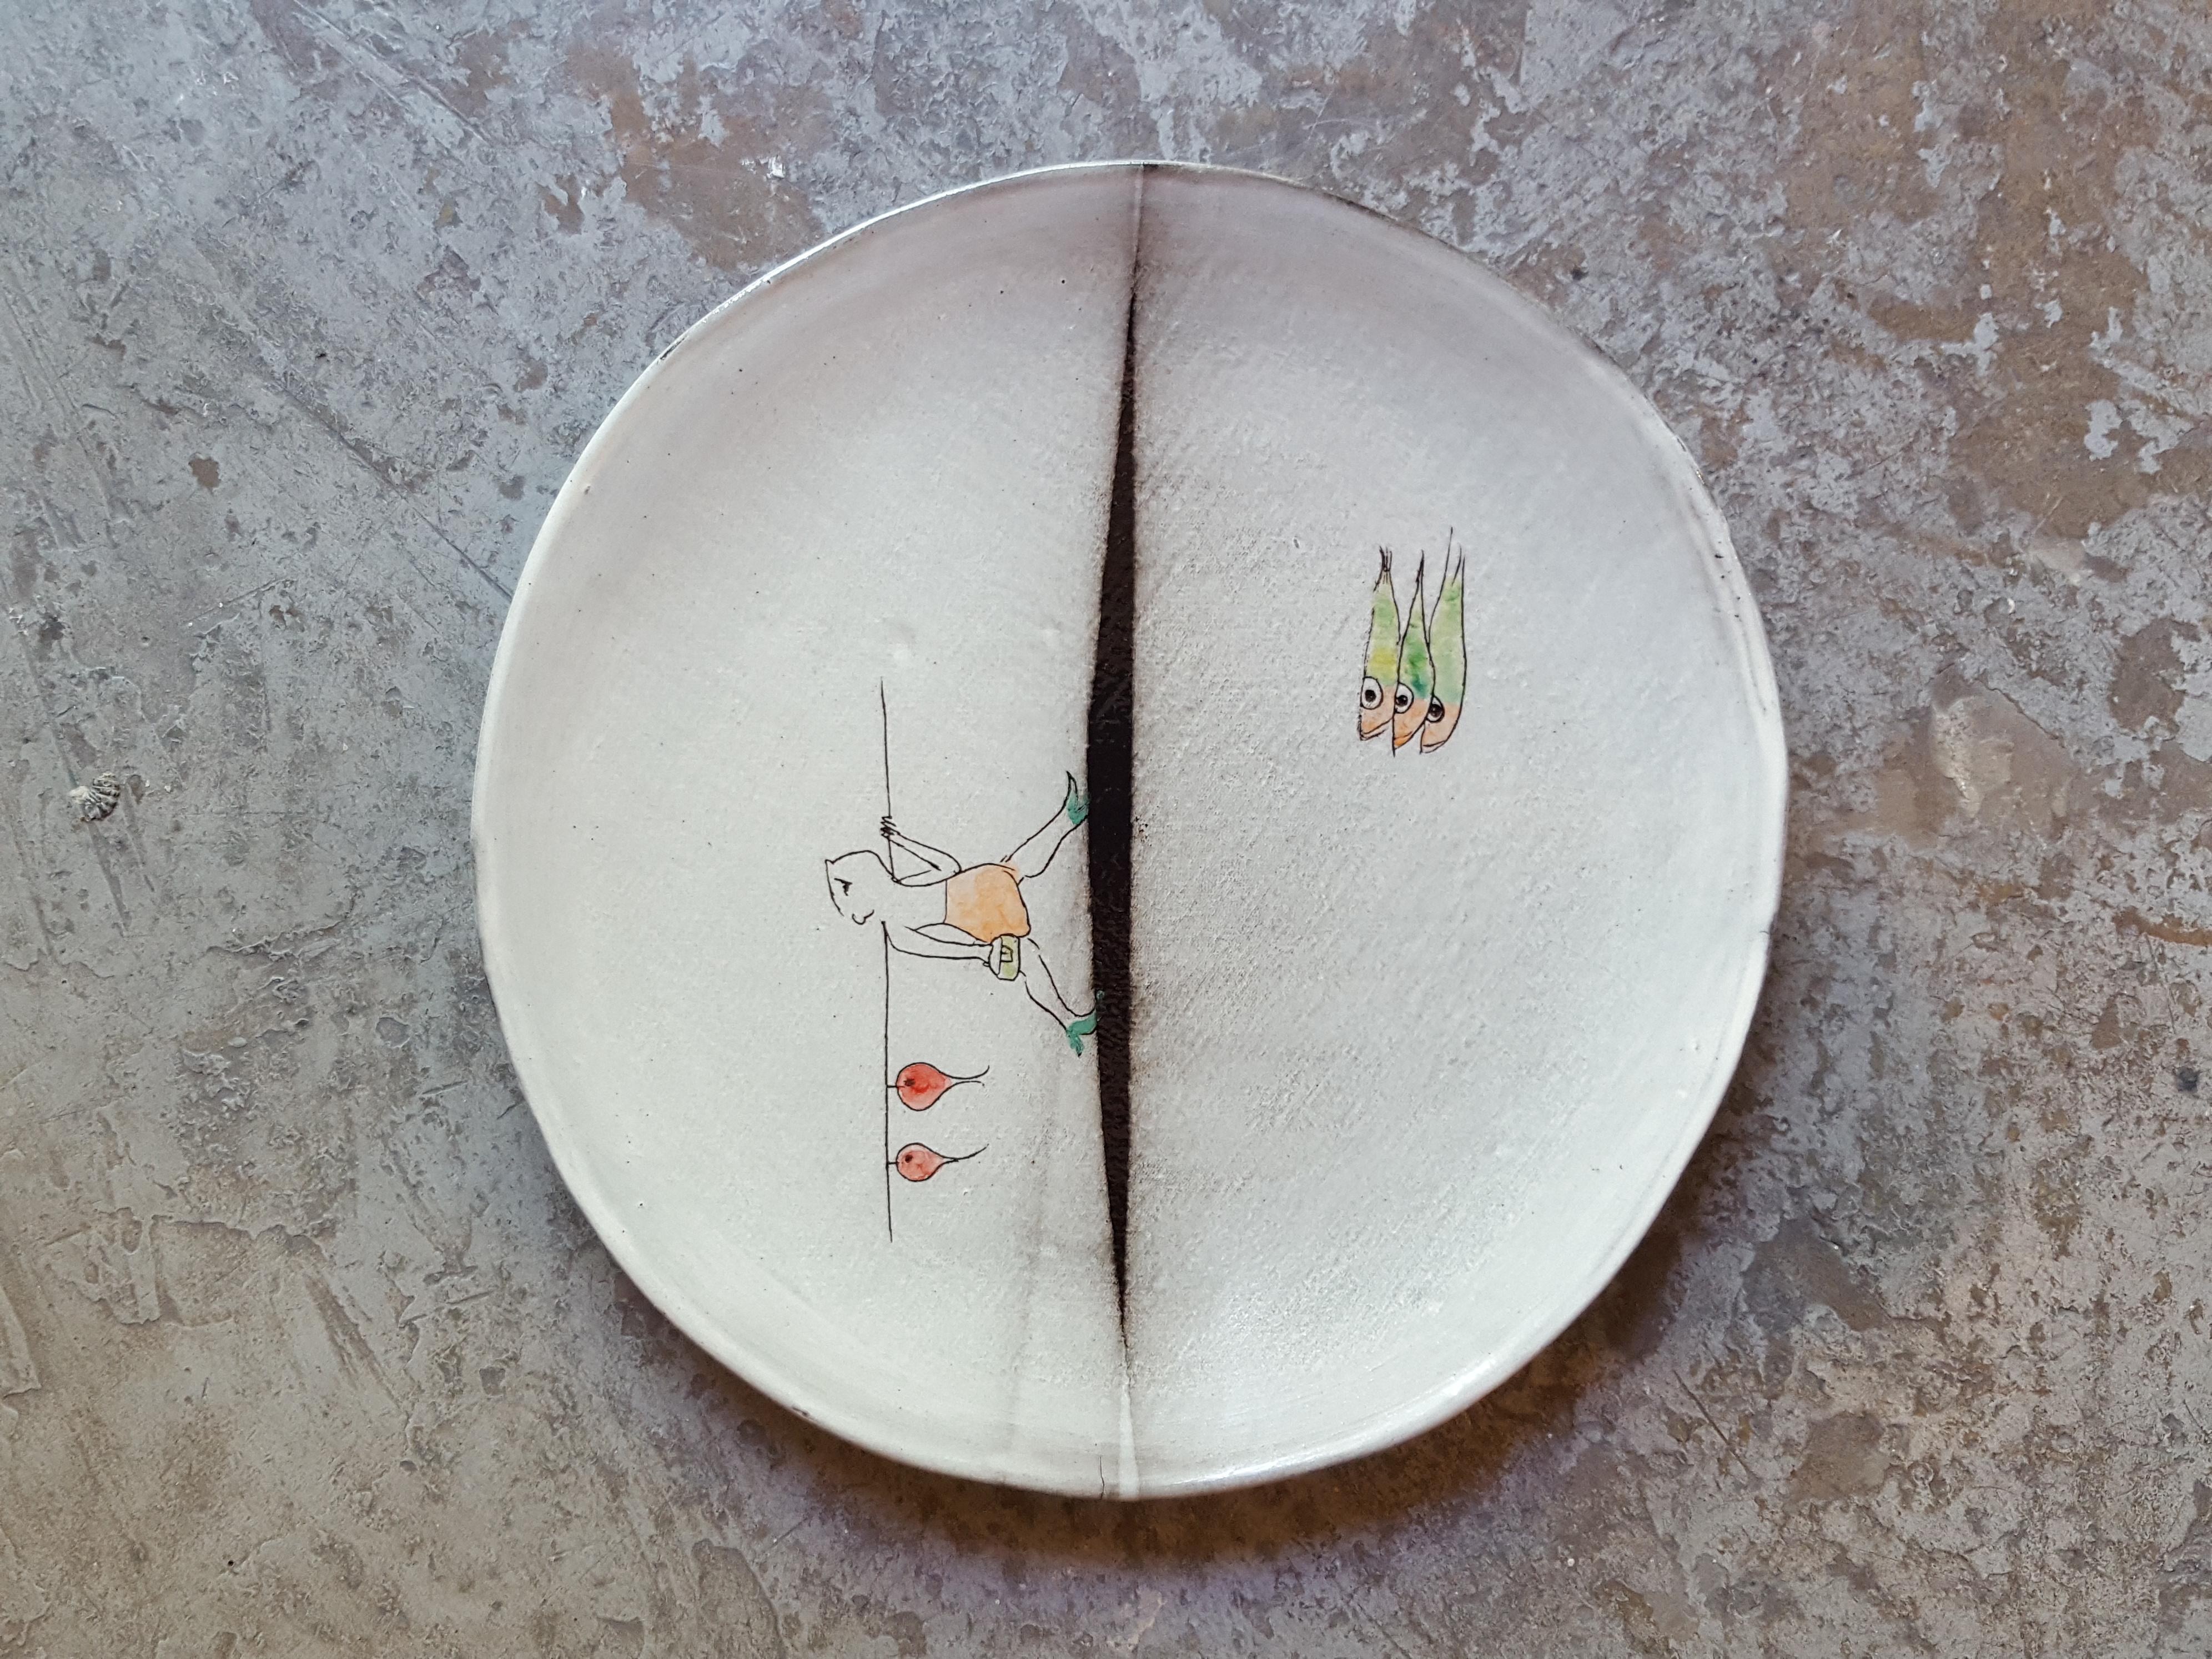 Ceramic earthenware Faience dinner plate artist creation, all handmade in France.
Using plaques of dark Faience, graffiti, paint and enamel.
Decoration hand-painted with the artist's creative poetic characters limited edition.
There are different